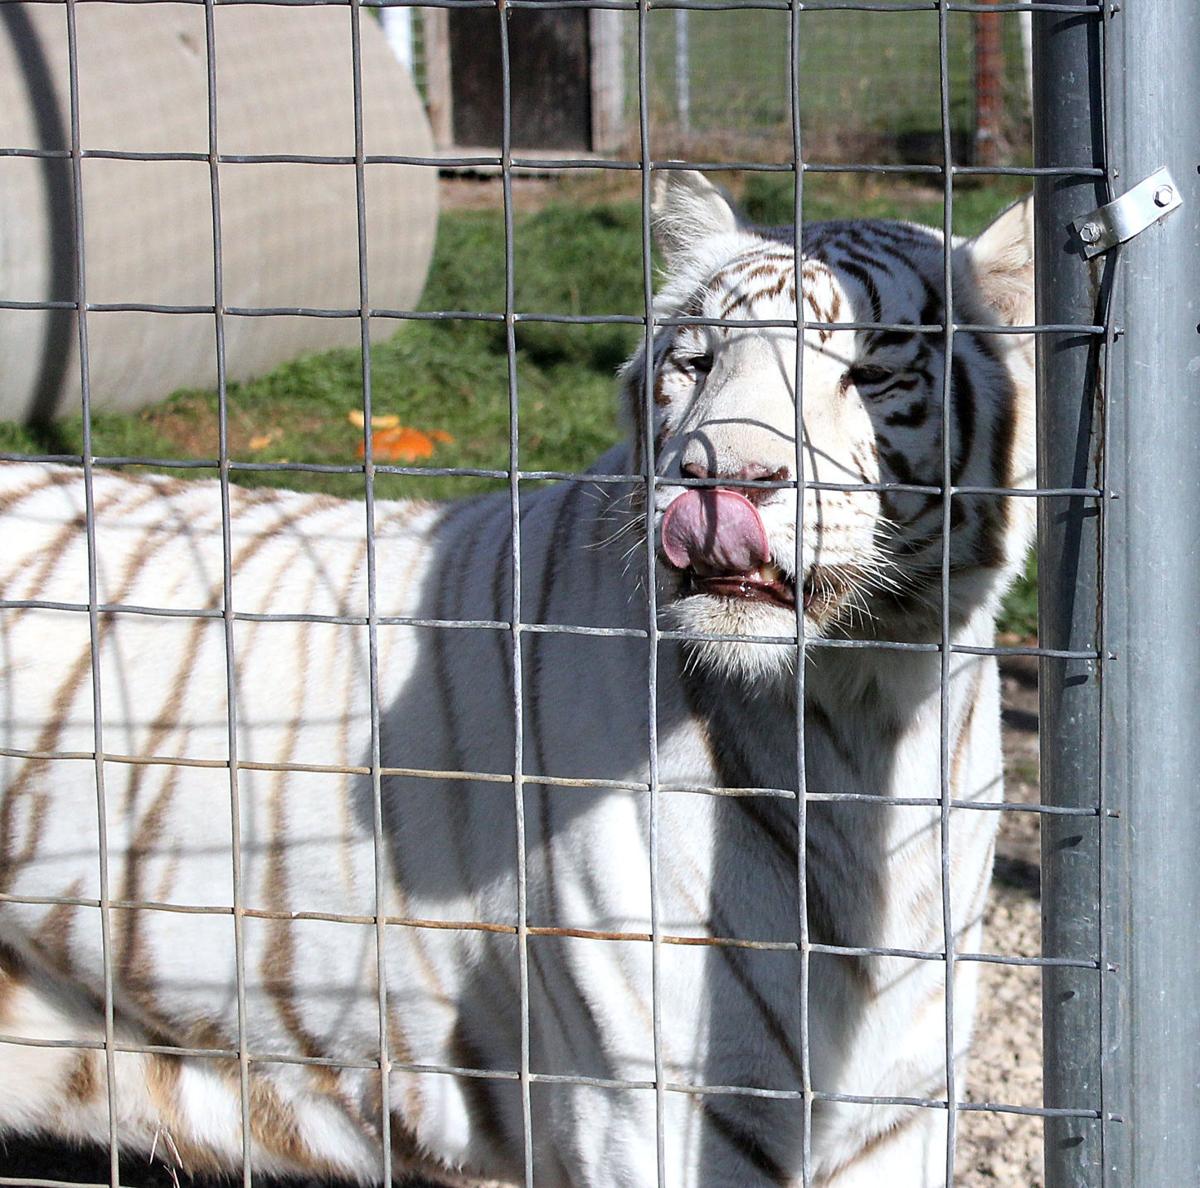 Big Cat Rescue will stay in Rock Springs, hosts first booze walk Sept